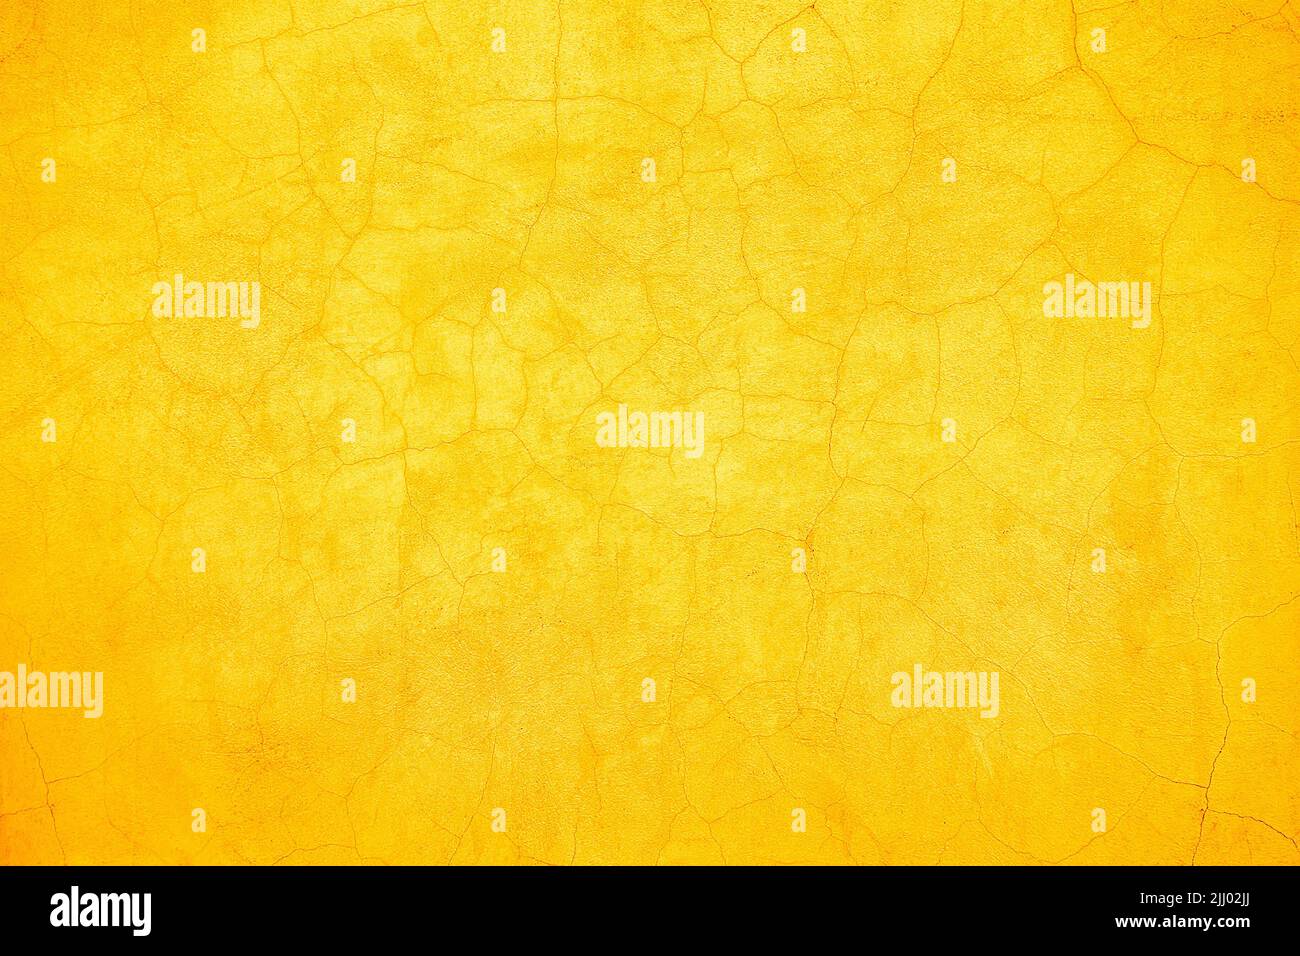 Abstract rustic yellow and orange cracked wall background texture design. Stock Photo